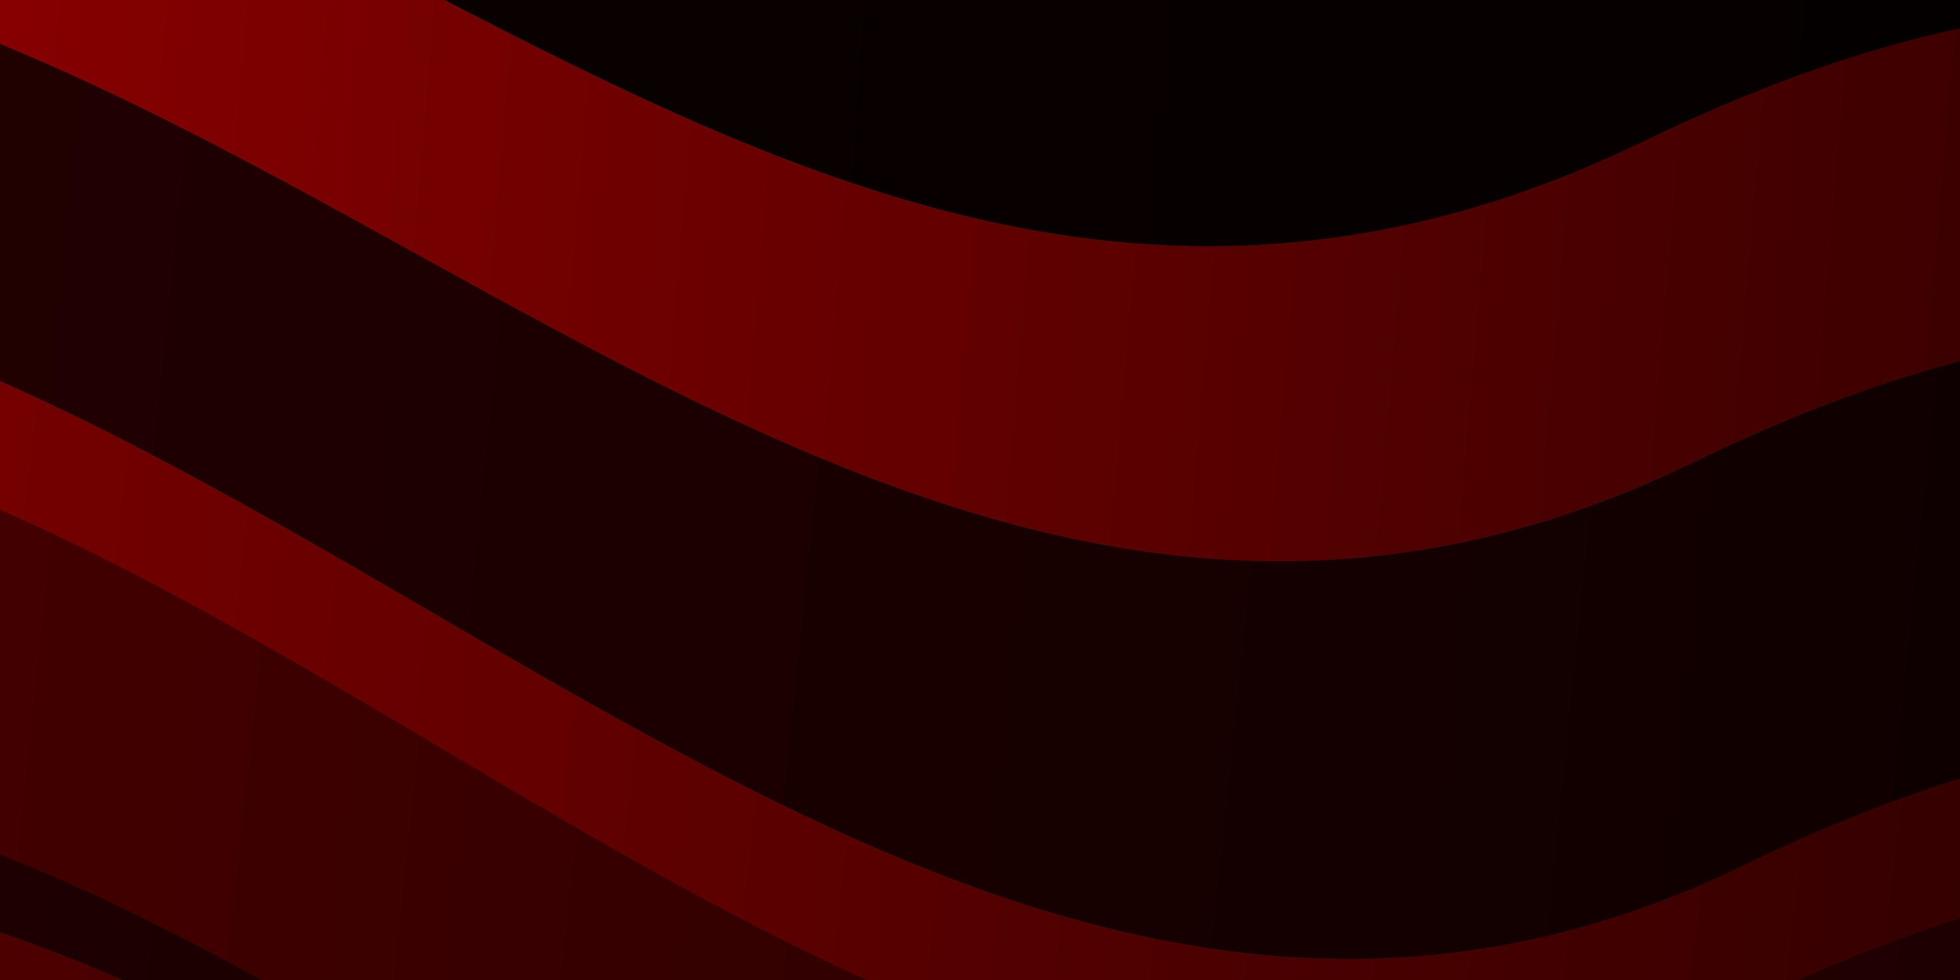 Dark Red vector background with curves.